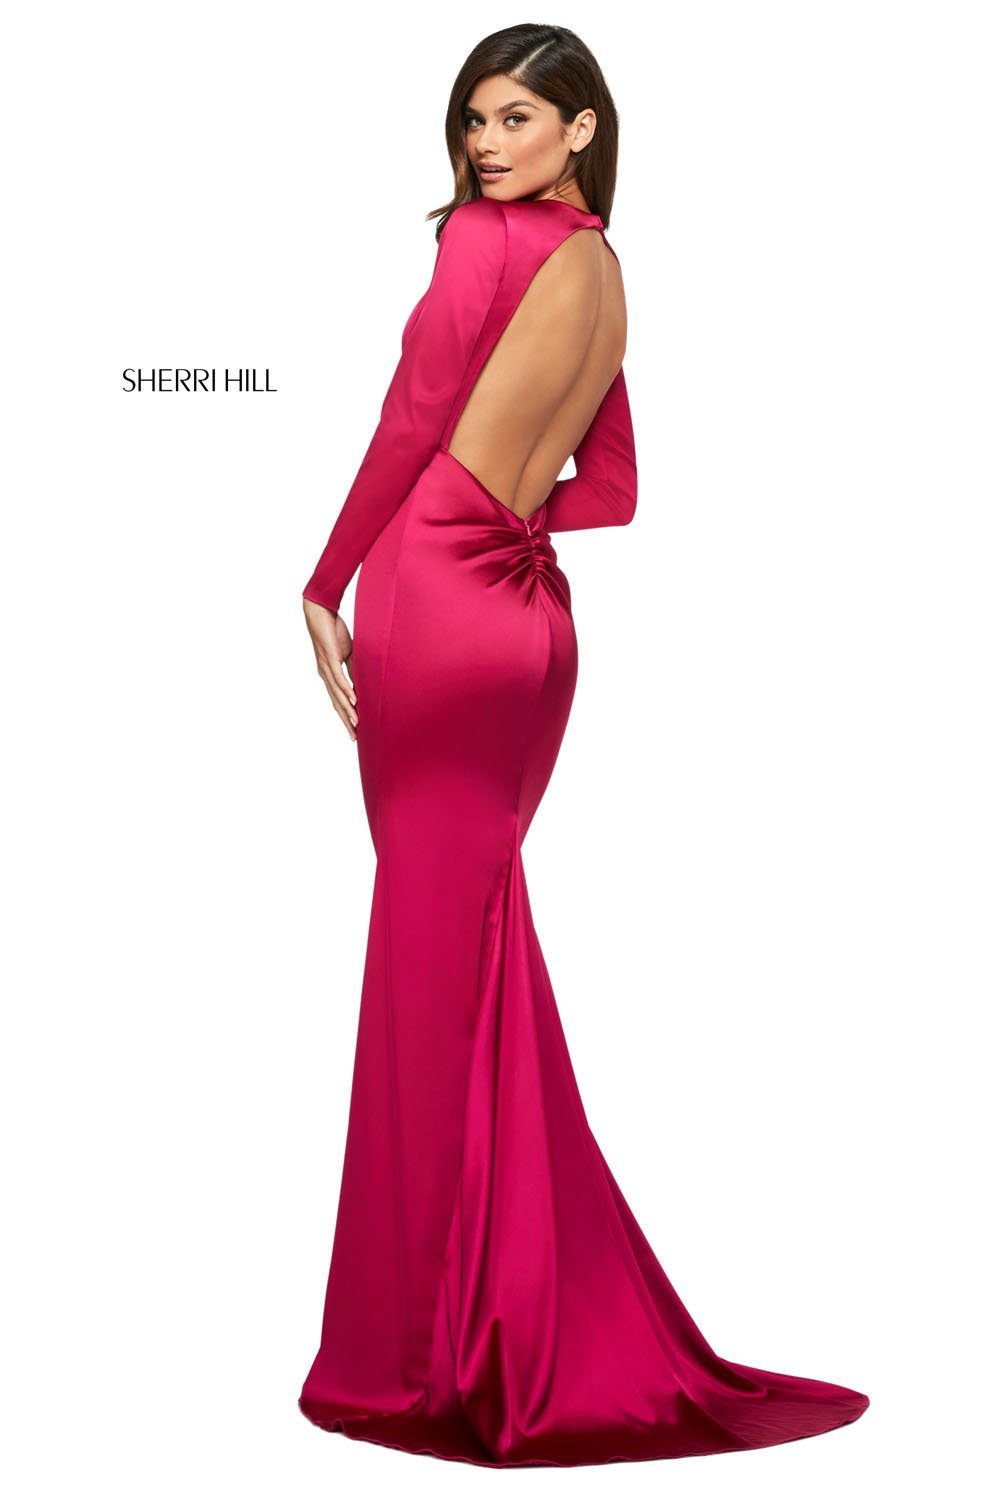 Sherri Hill 53606 dress images in these colors: Blush, Red, Ruby, Teal, Berry, Black, Emerald, Navy, Royal.